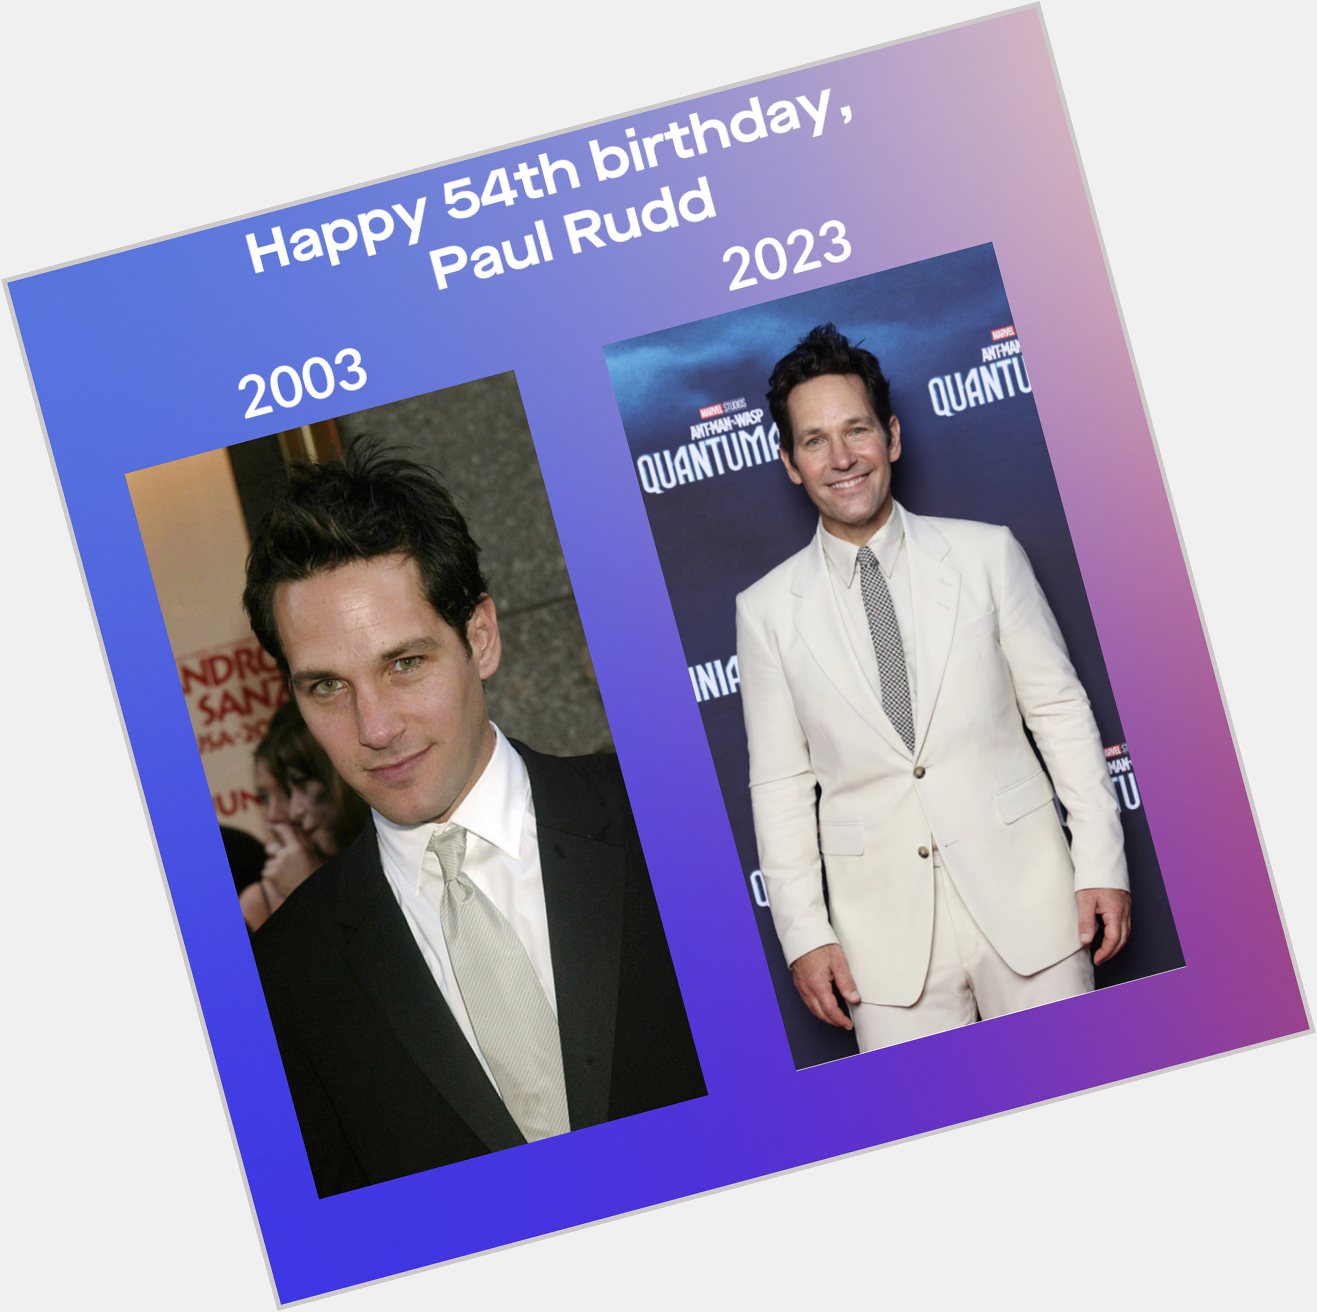 Happy birthday to Overland Park s own, Paul Rudd, who is allegedly 54 today. 